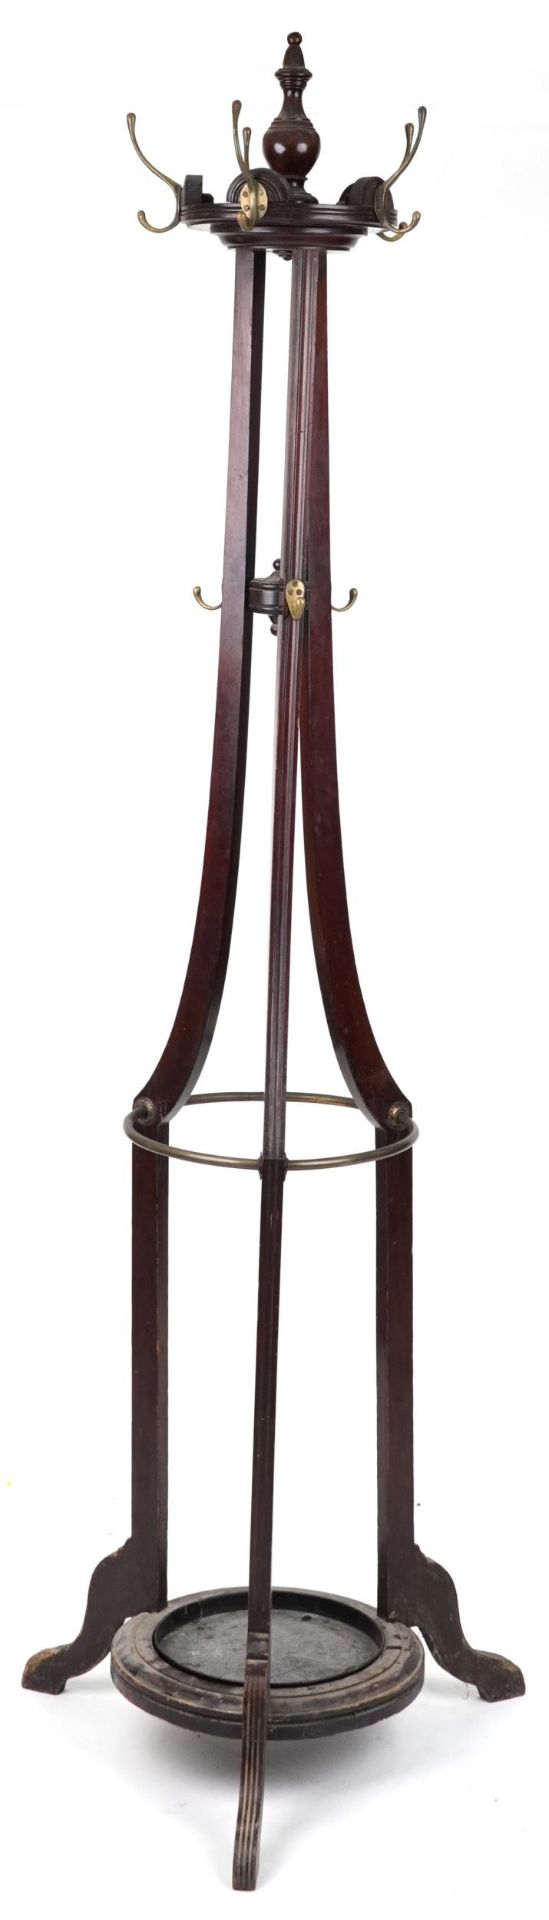 Edwardian mahogany revolving hat, coat and umbrella stand with S & H Jewell of High Holborn London